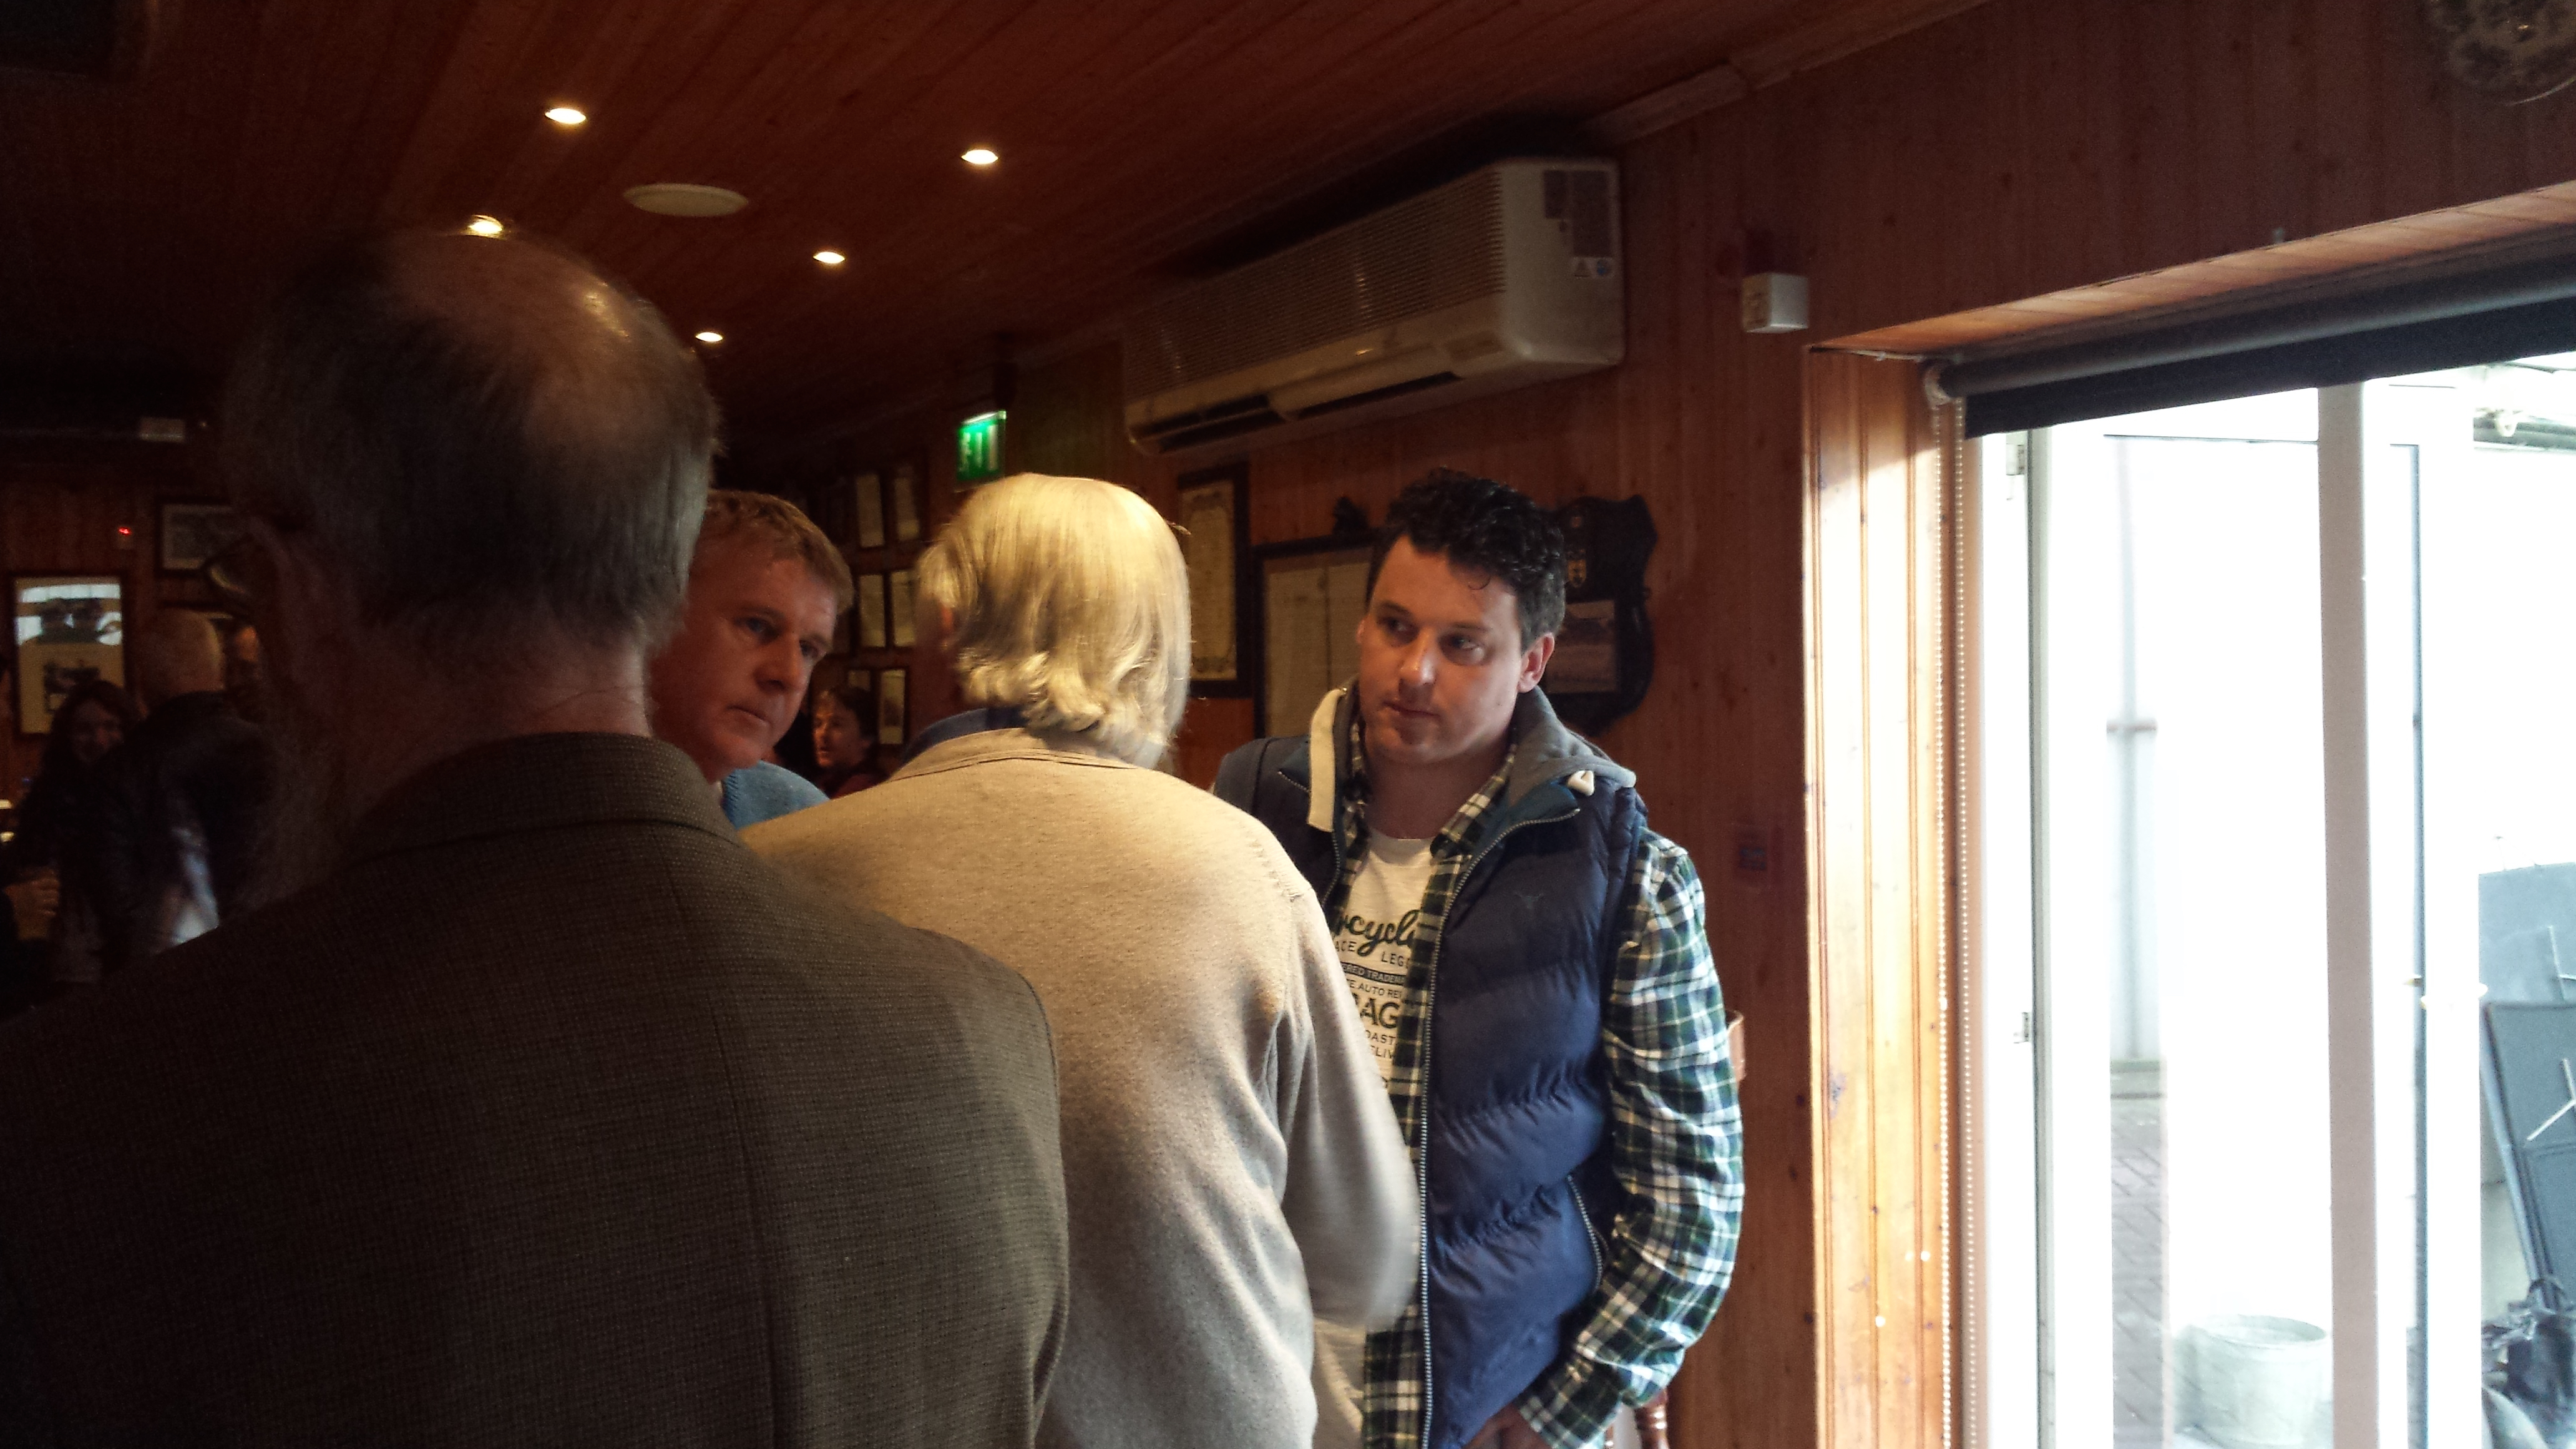 Brian Walsh and Declan Reynolds talking to director Jack Conroy before a scene on THE GAELIC CURSE.